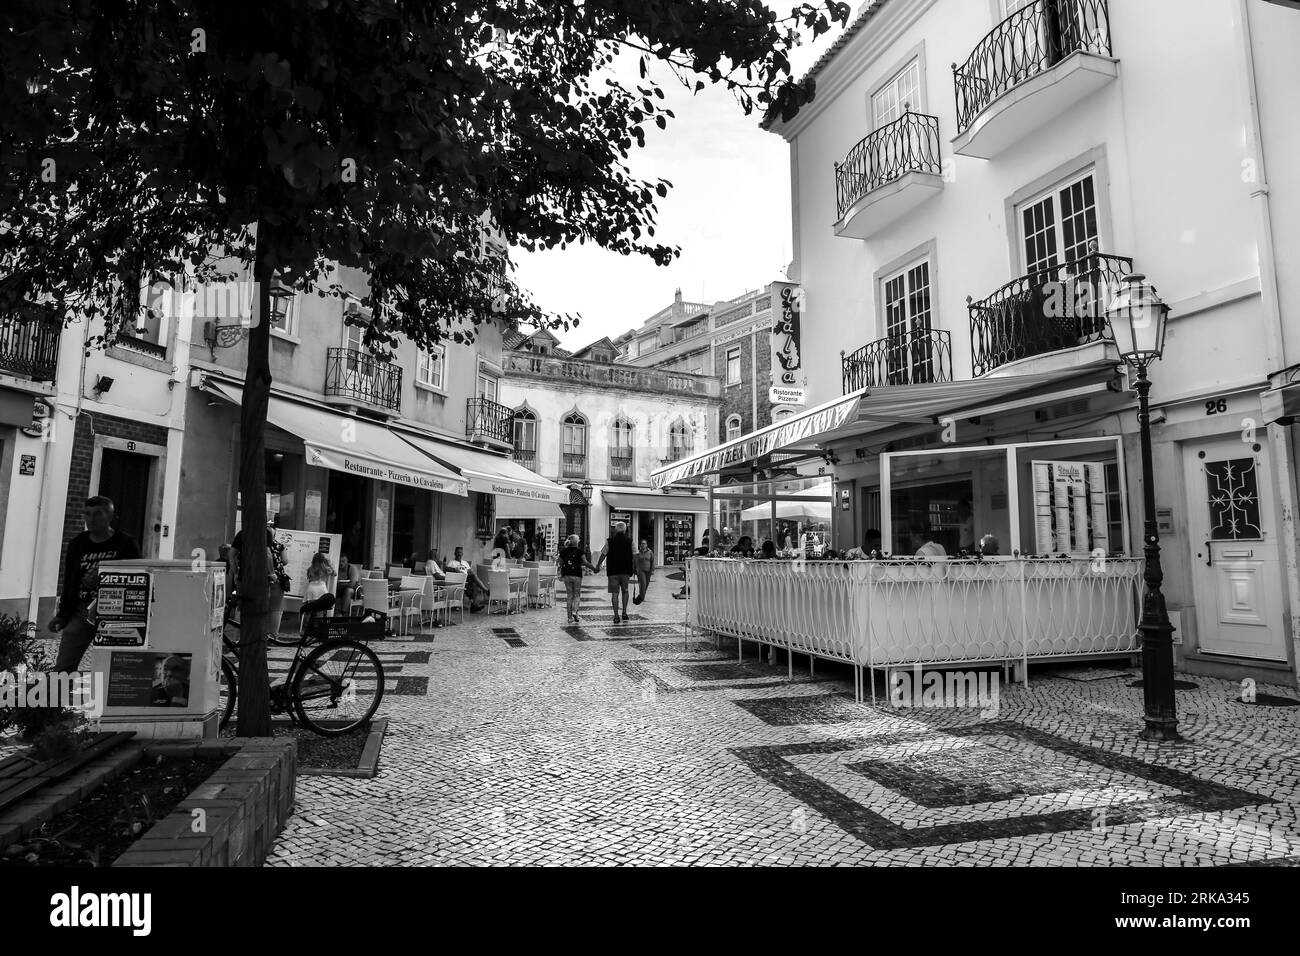 Lagos, Portugal- October 20, 2022: Narrow Cobblestone streets and typical Portuguese facades in Lagos city, Portugal Stock Photo